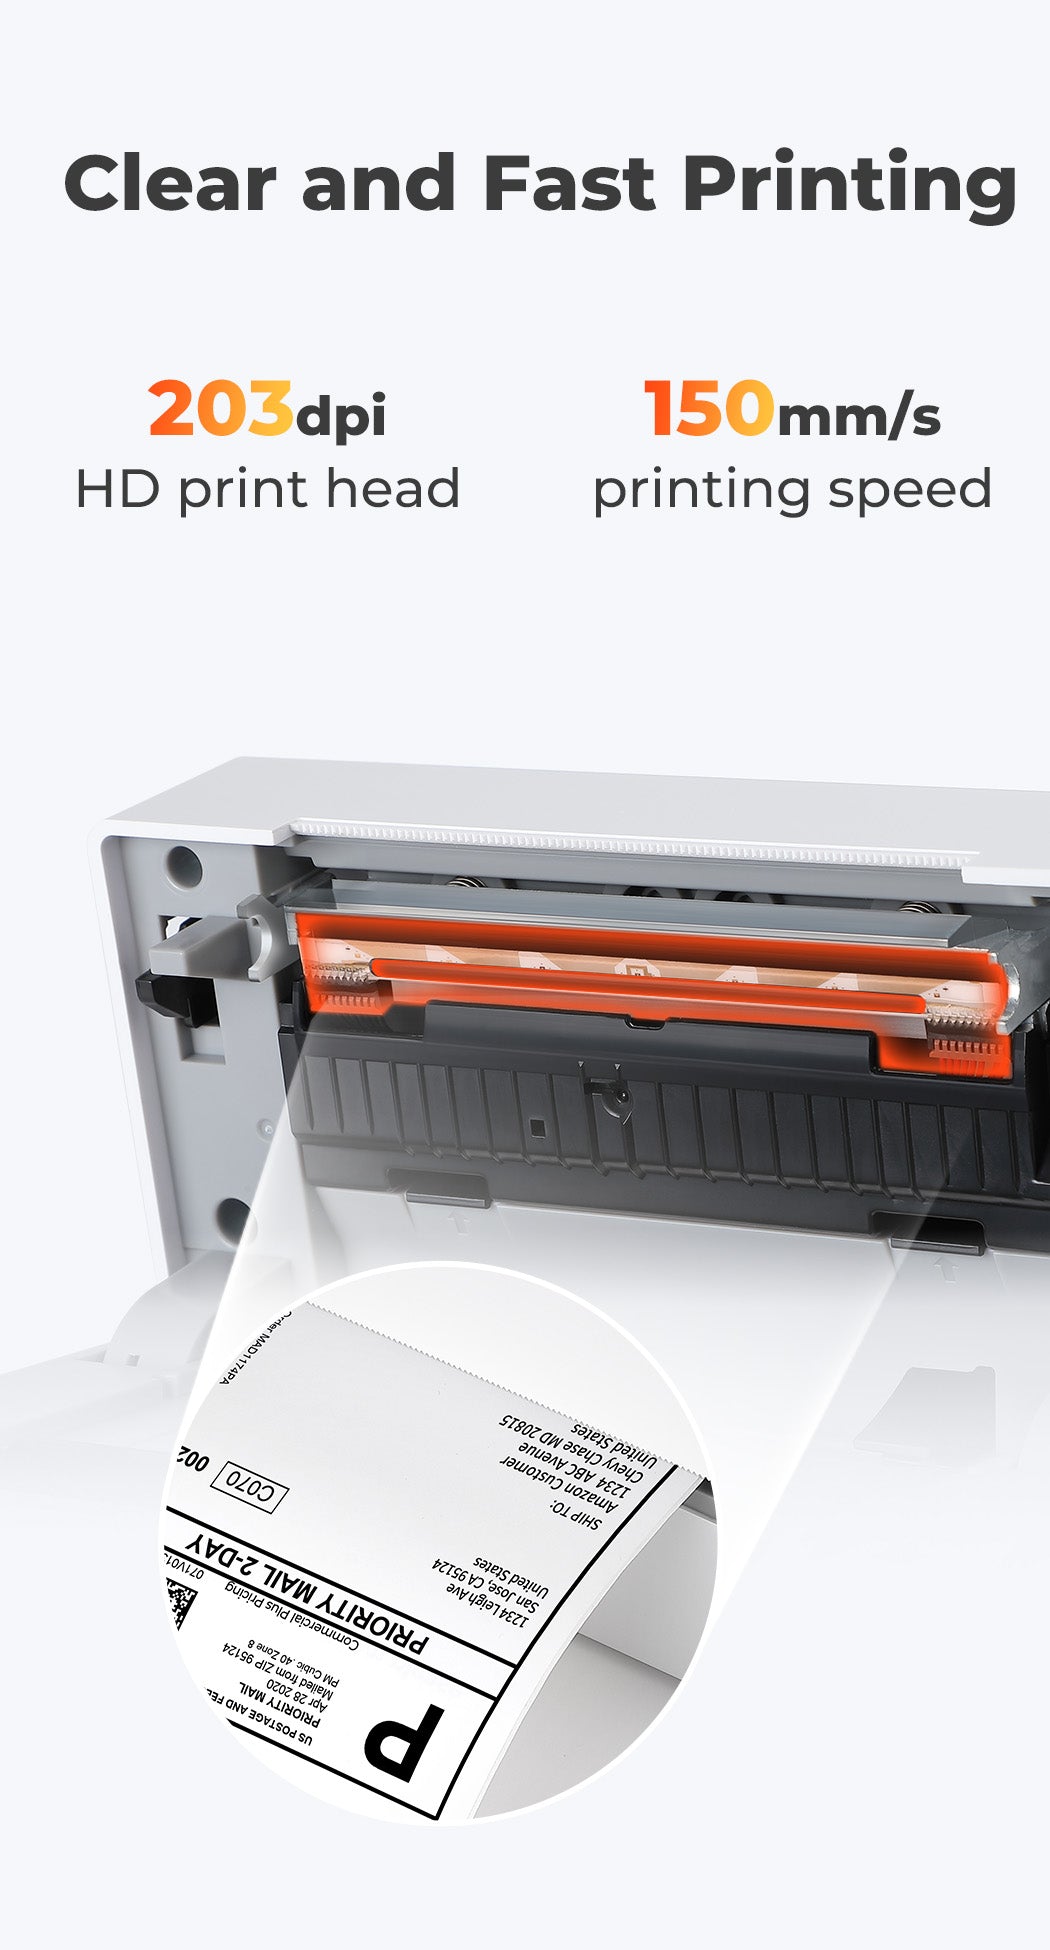 MUNBYN P130 direct thermal label printer can print labels at the speed of 150mm/s.